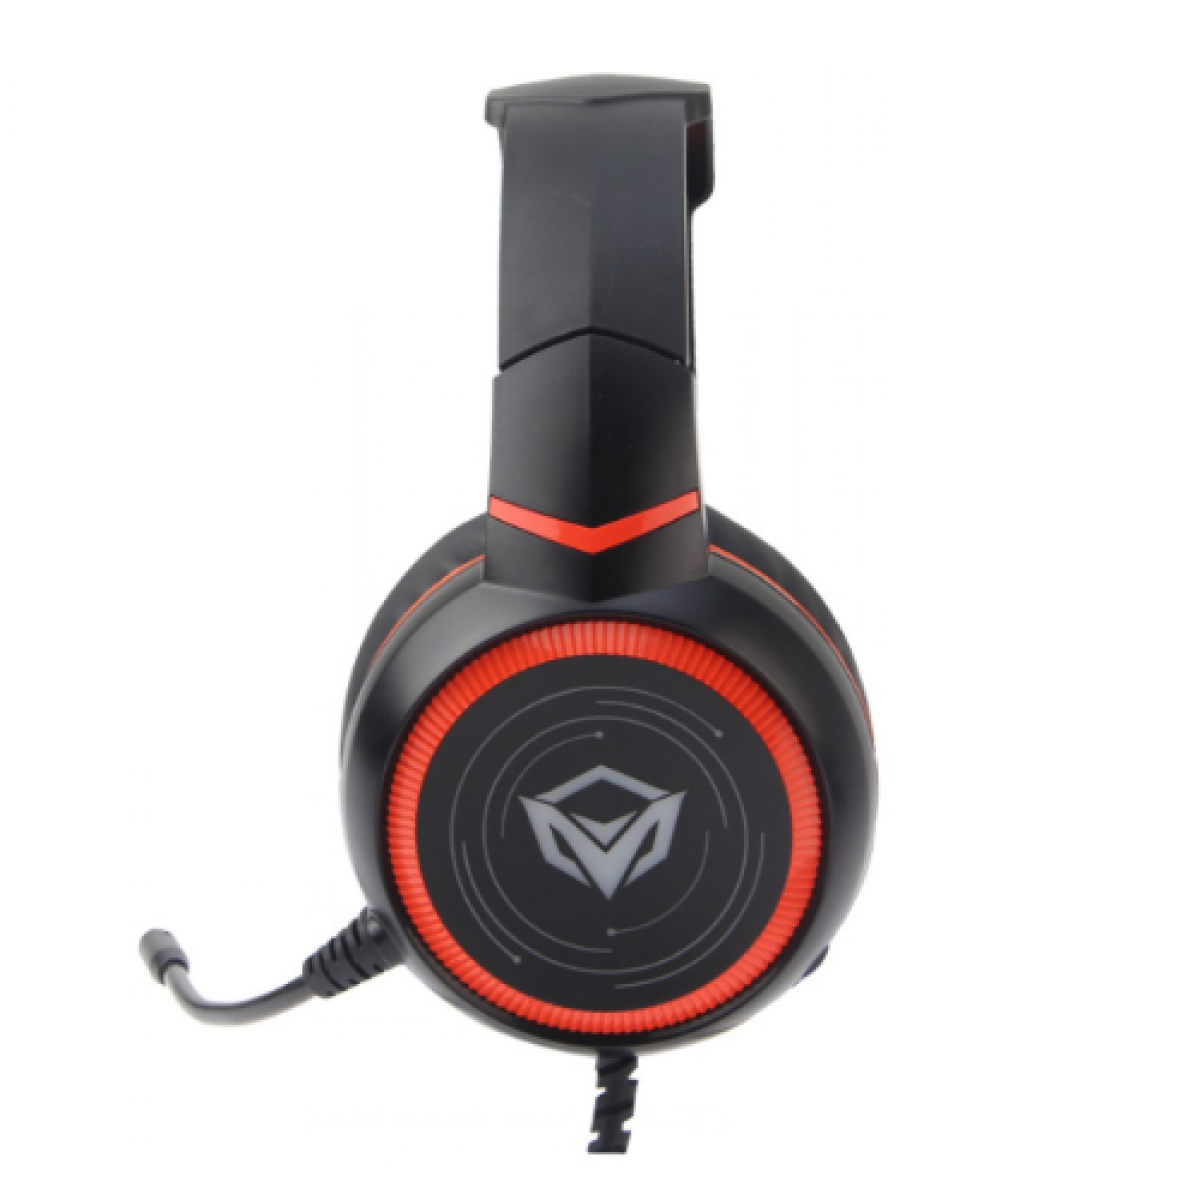 MeeTion Best HIFI 7.1 Gaming Headset & Surround Sound Headphone LED Backlit with Mic